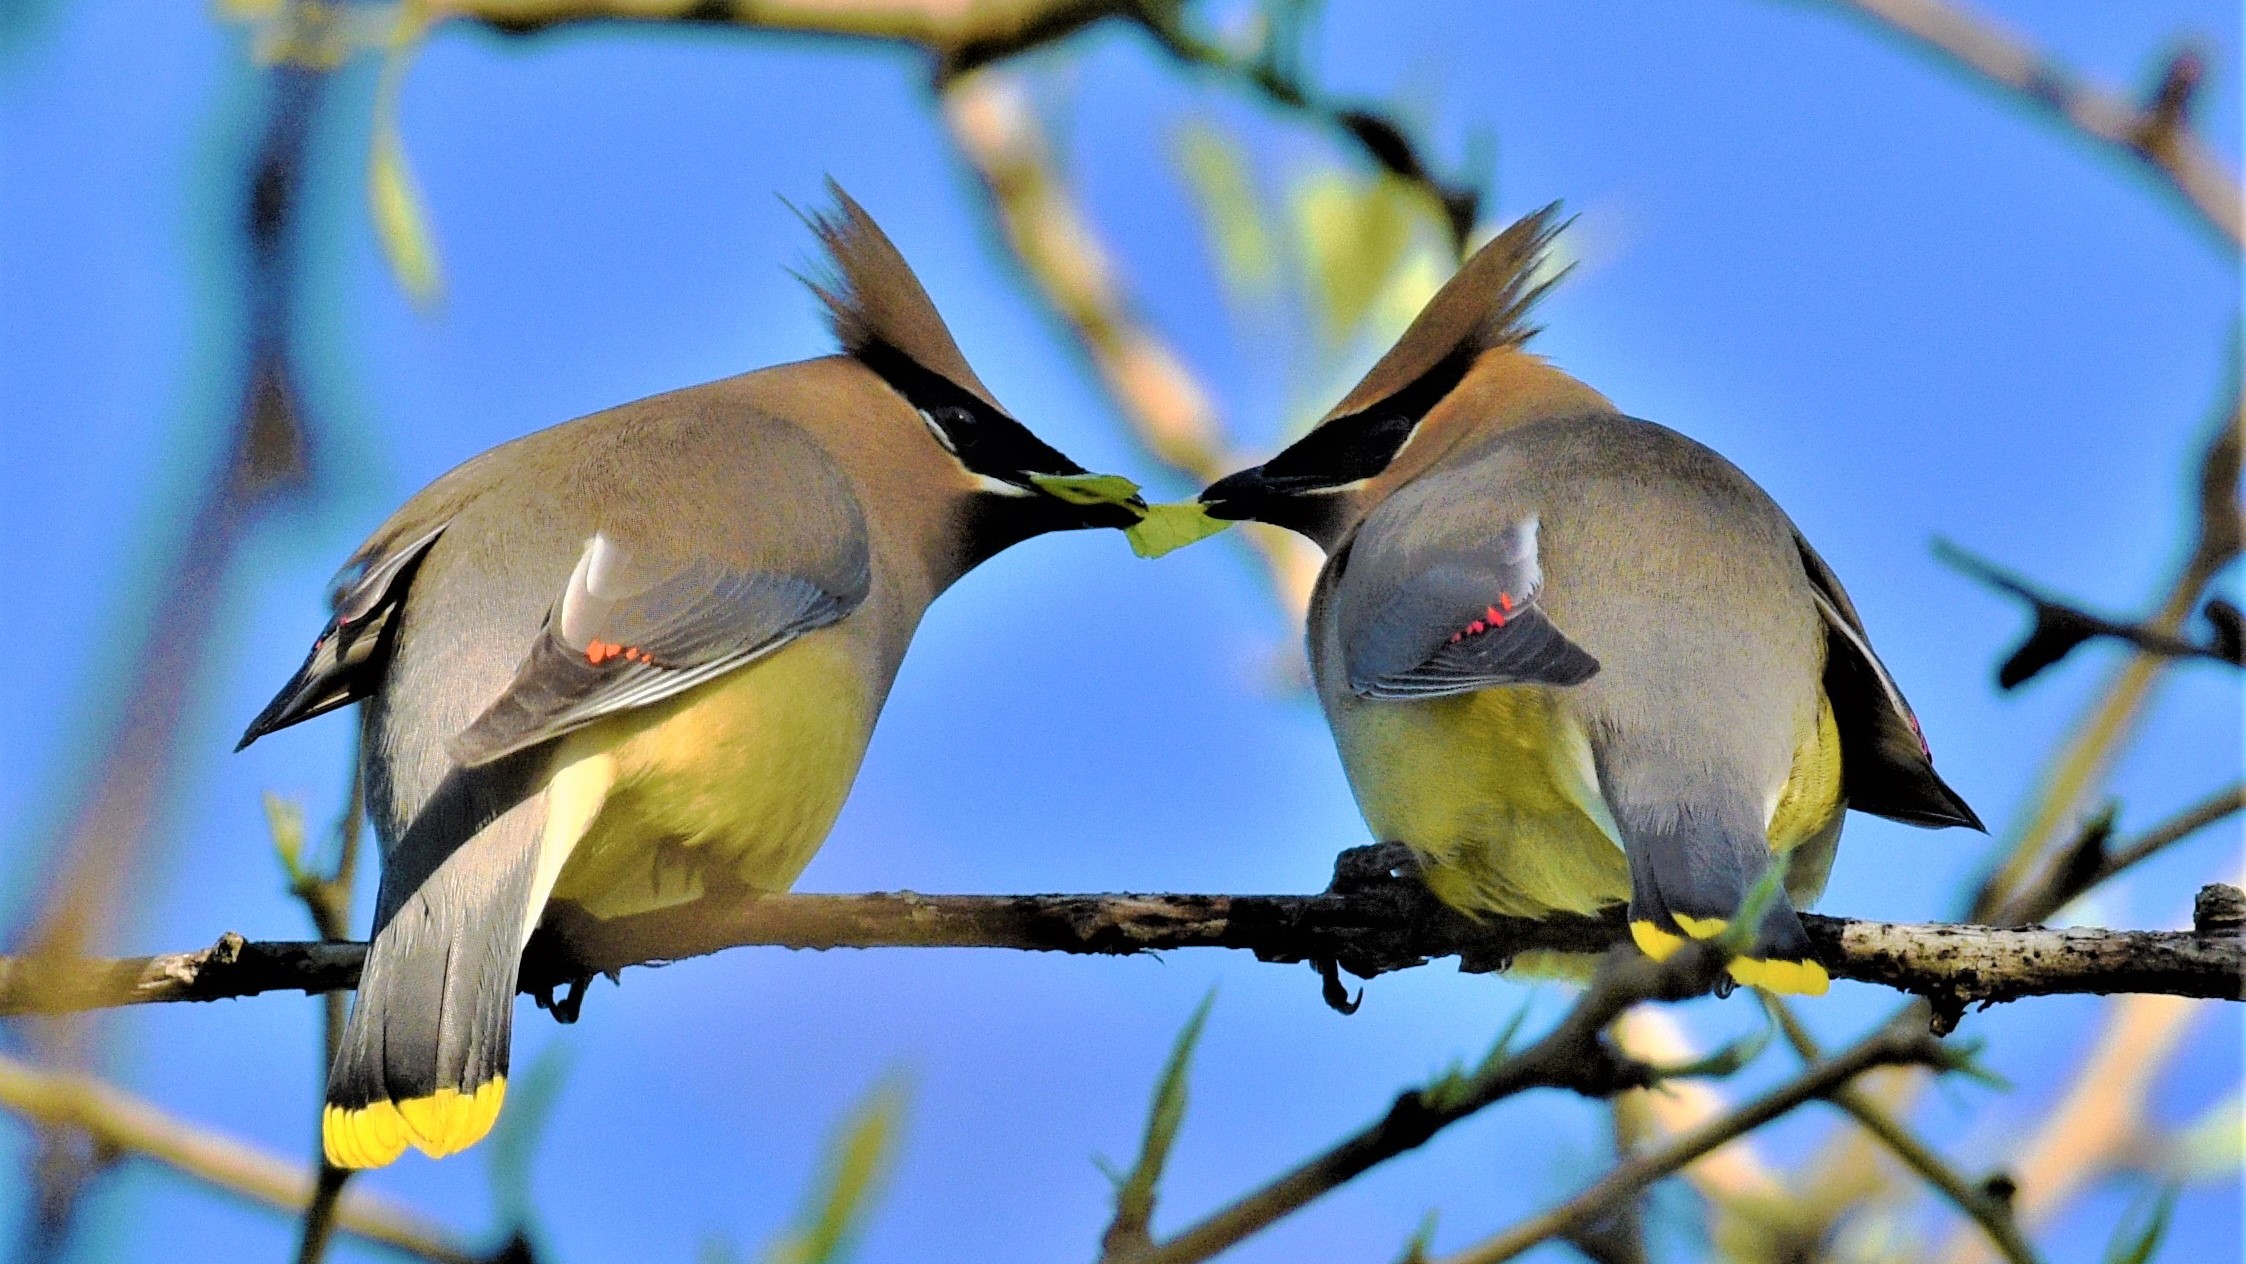 Two cedar waxwings sharing a meal on a branch.